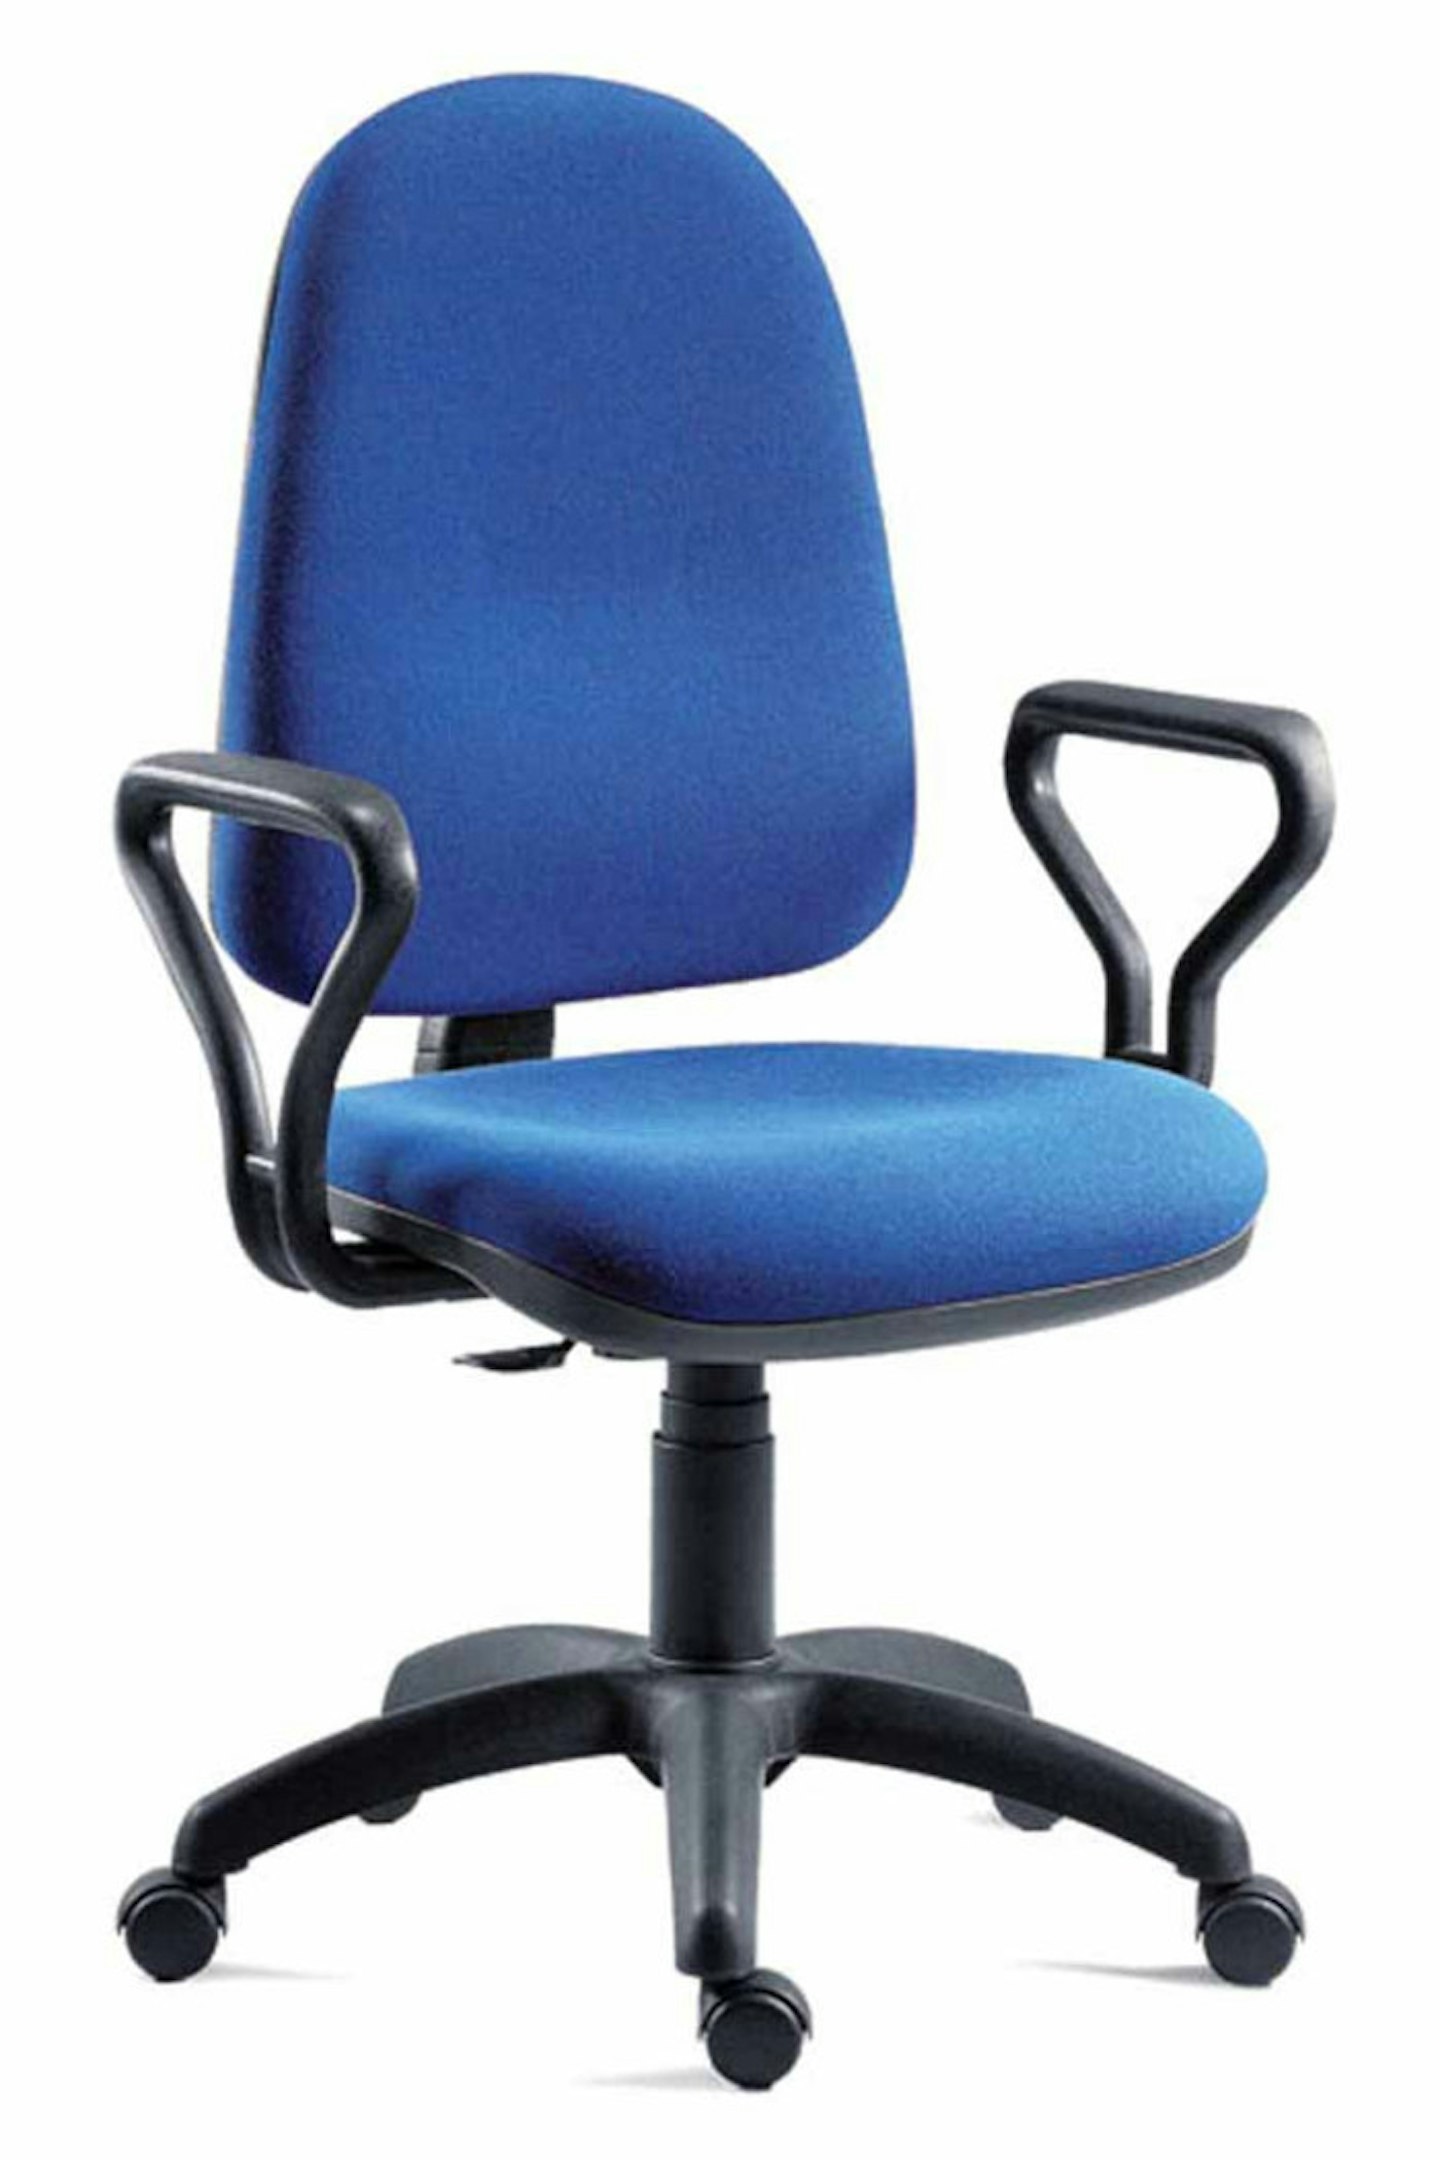 7. Your Office Chair